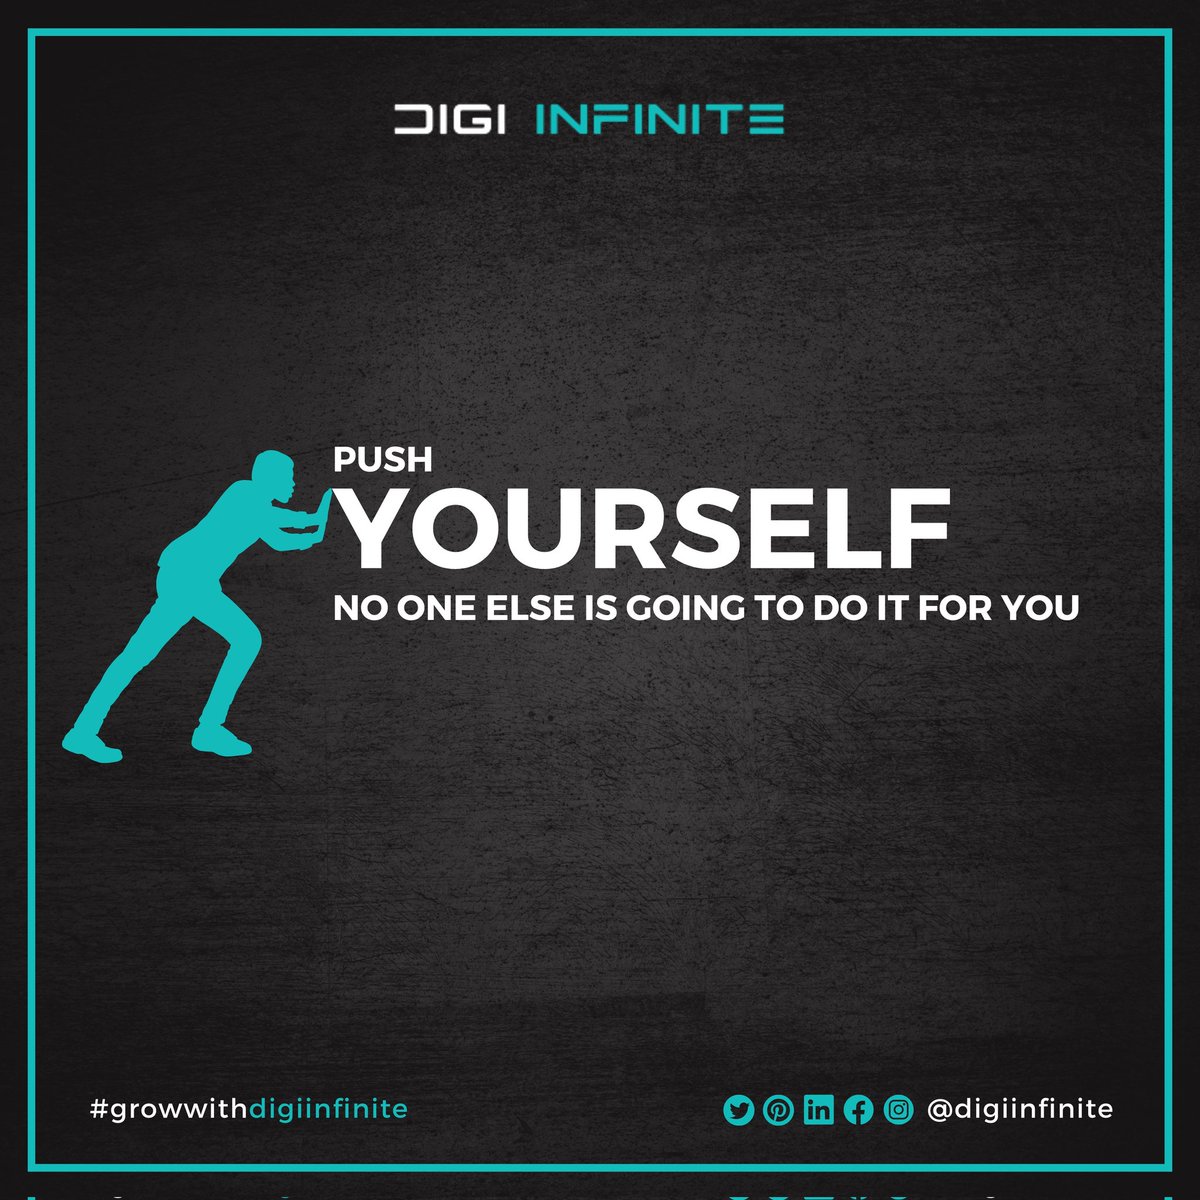 Empower yourself with the drive to succeed. Remember, the only person who can push you to greatness is you. Own your journey and make every step count.

#digiinfinite #growuptoinfinite #growwithdigiinfinite #pushyourself #ownyoursuccess #selfdriven #pushyourlimits #selfmotivation